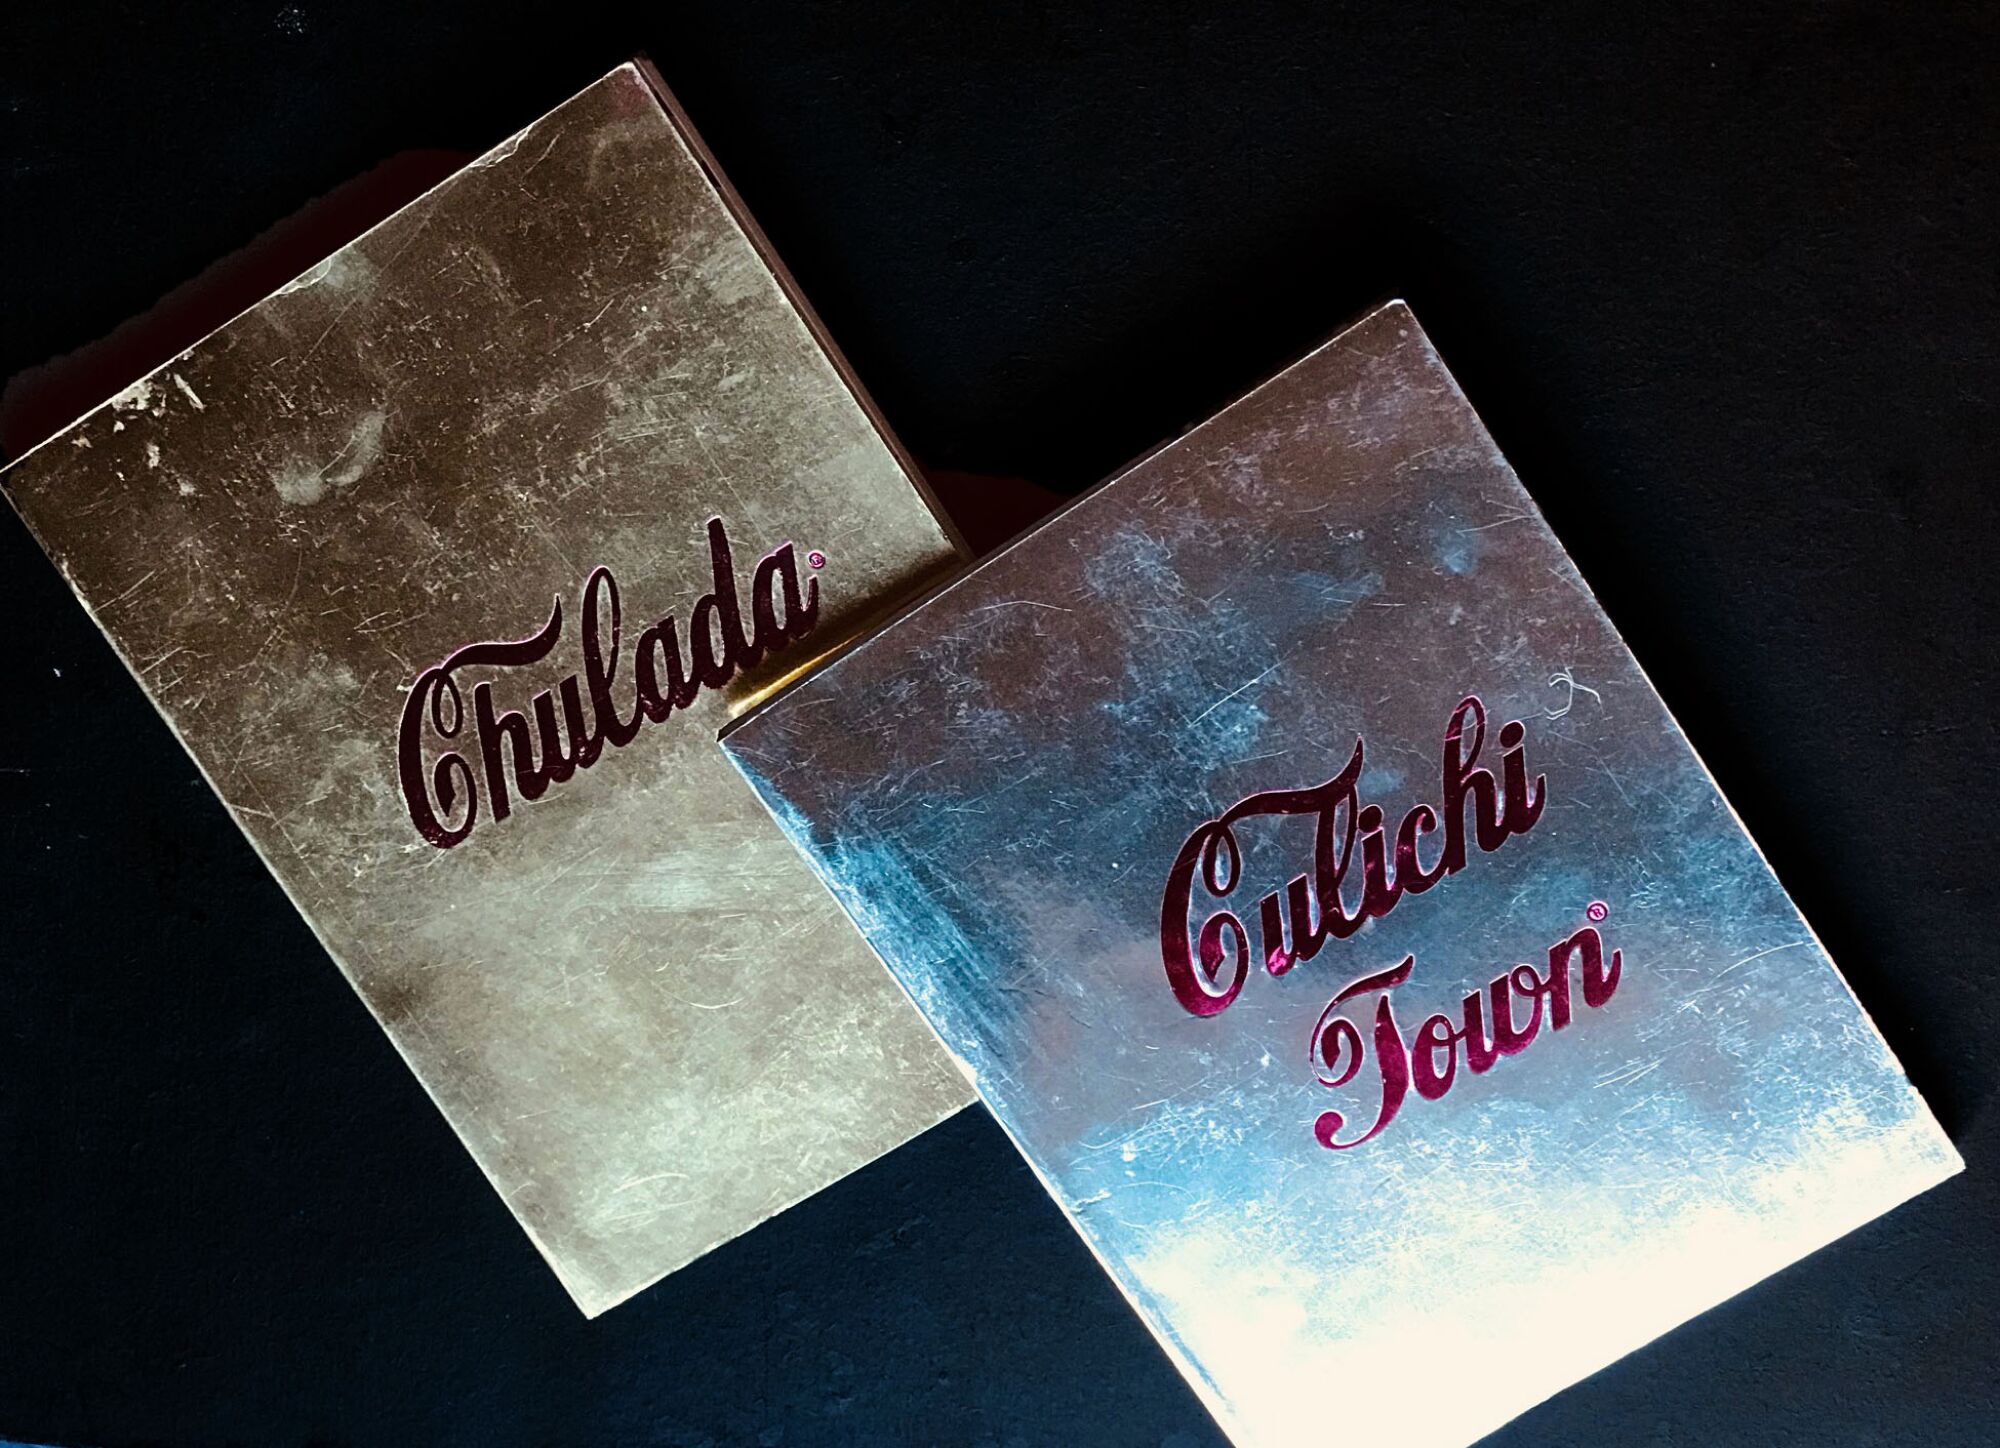 Two book covers in gold for "Chulada" and "Culichitown" feature their titles in red, cursive script.